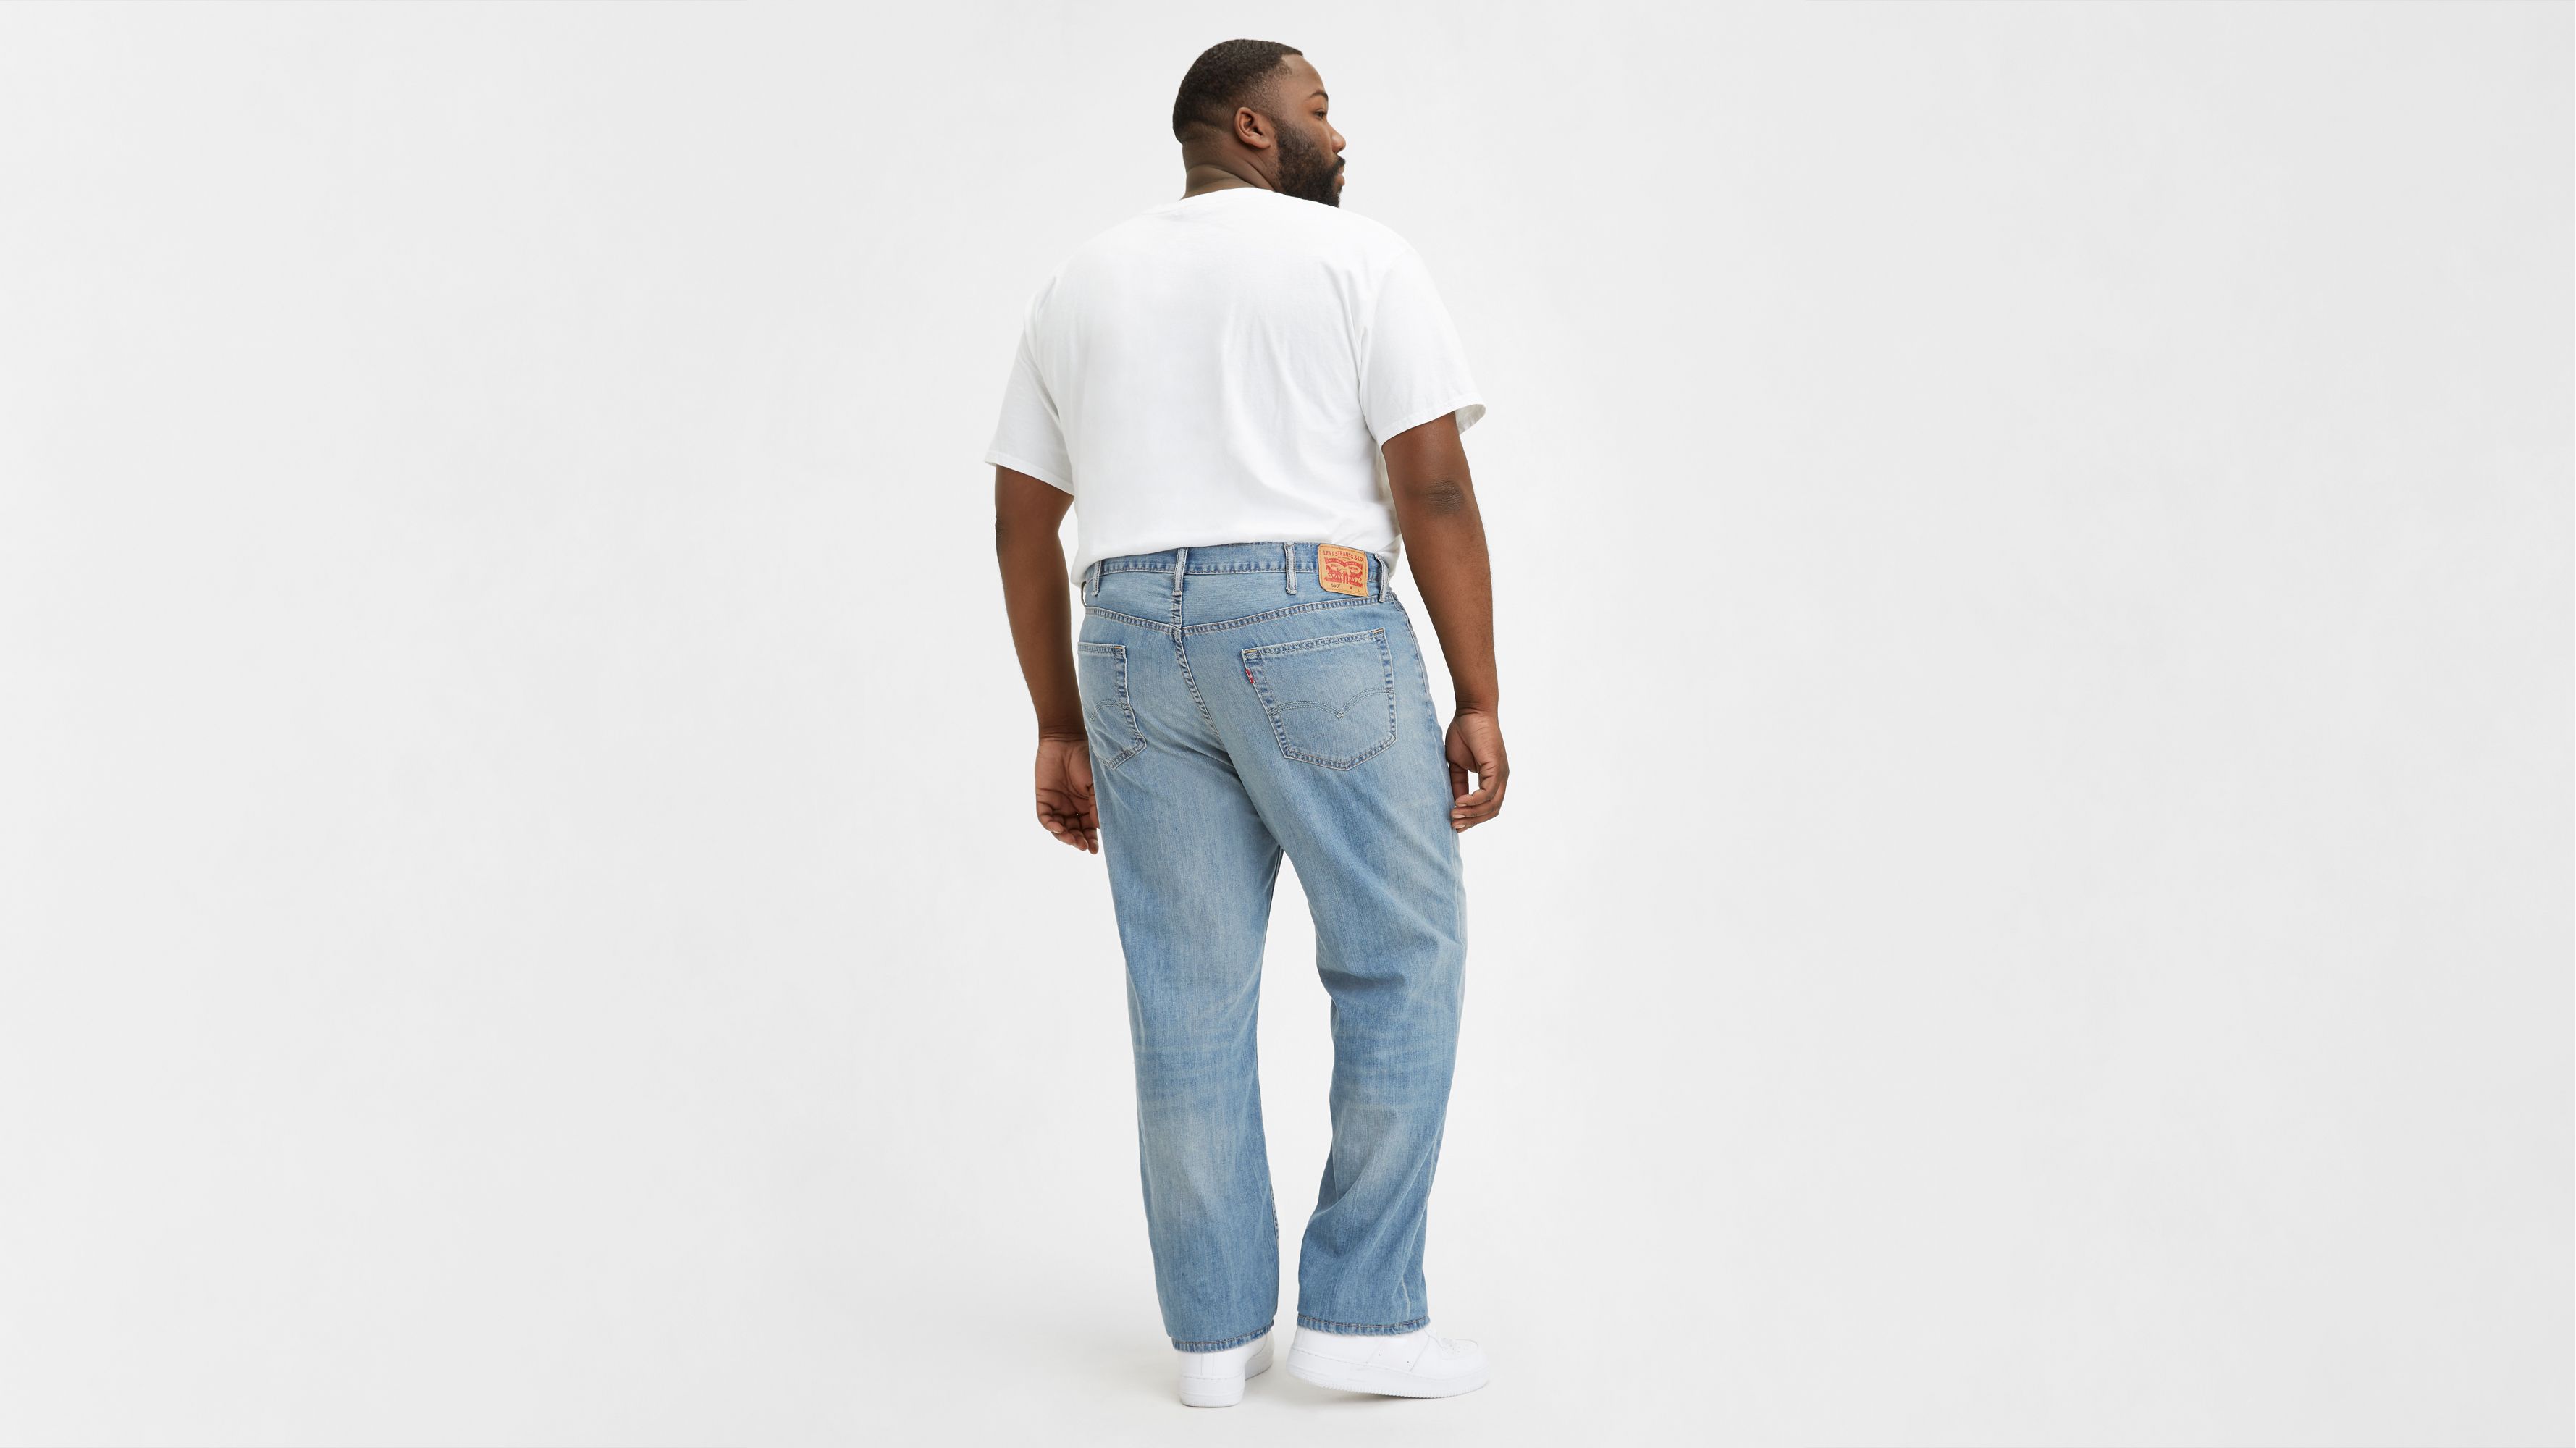 559™ Relaxed Straight Men's Jeans (big 